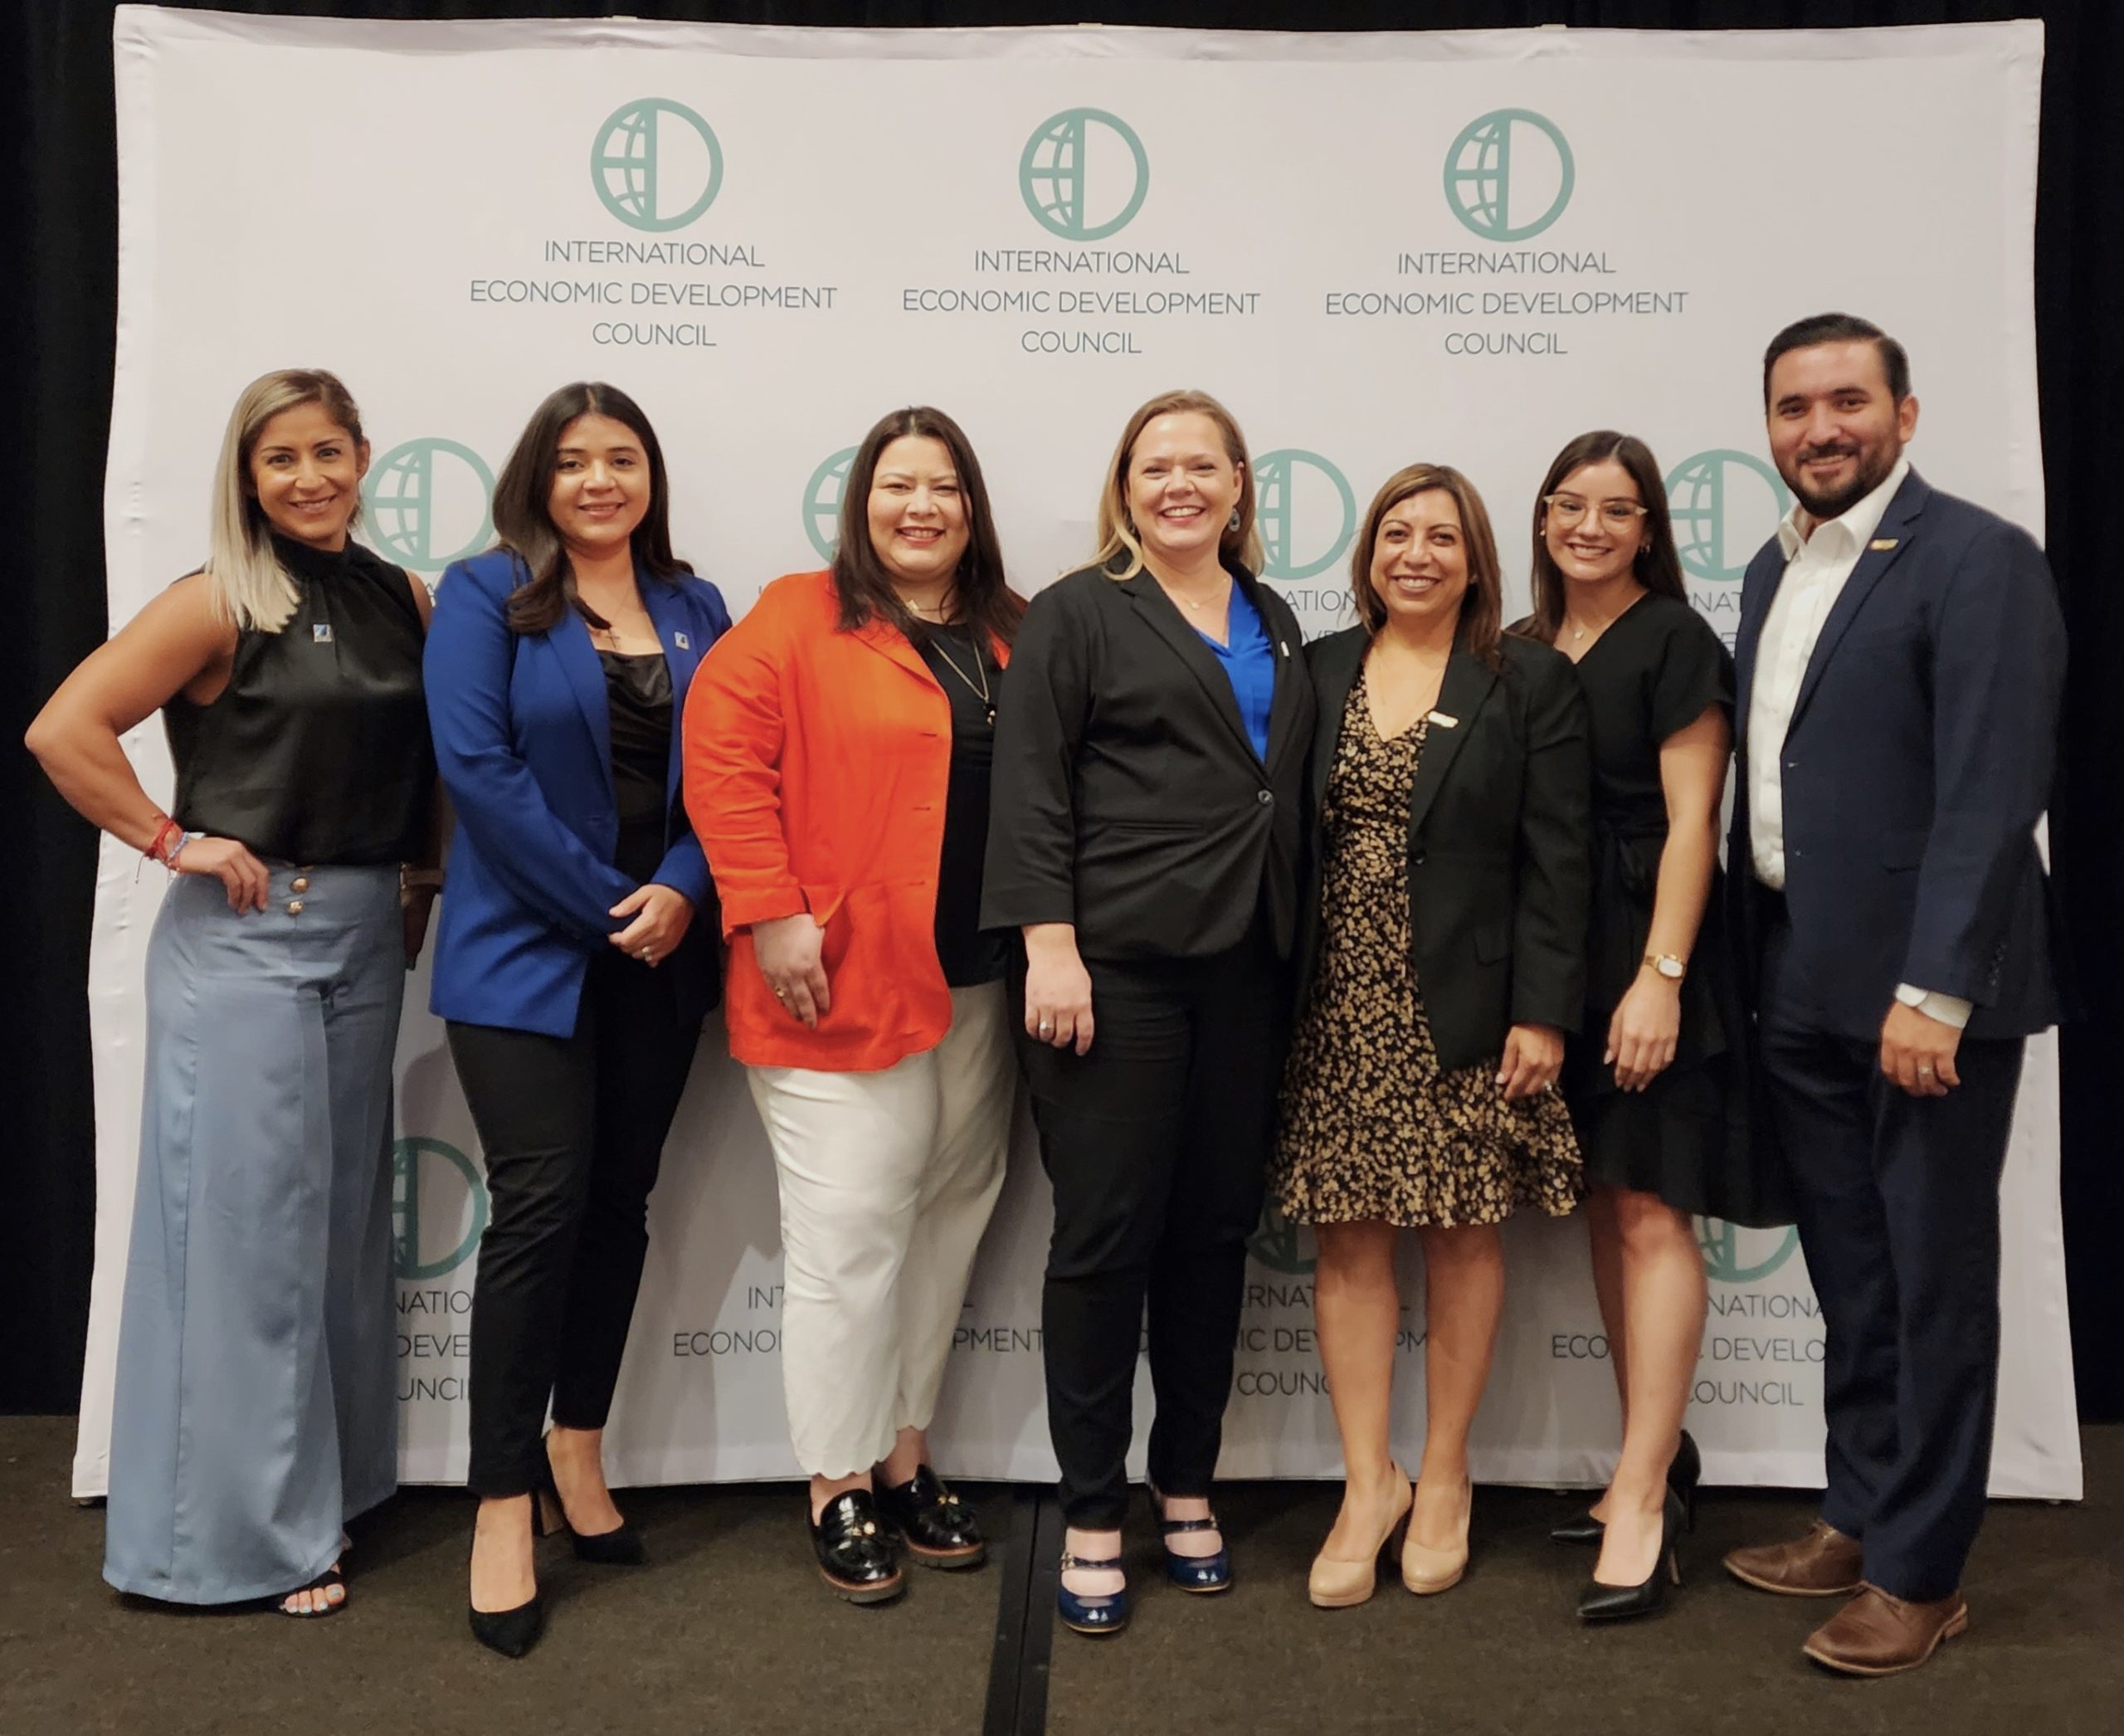 The Brownsville Community Improvement Corporation is Recognized at 2022’s IEDC Annual Conference for Excellence in the Categories of Entrepreneurship and Neighborhood Development.